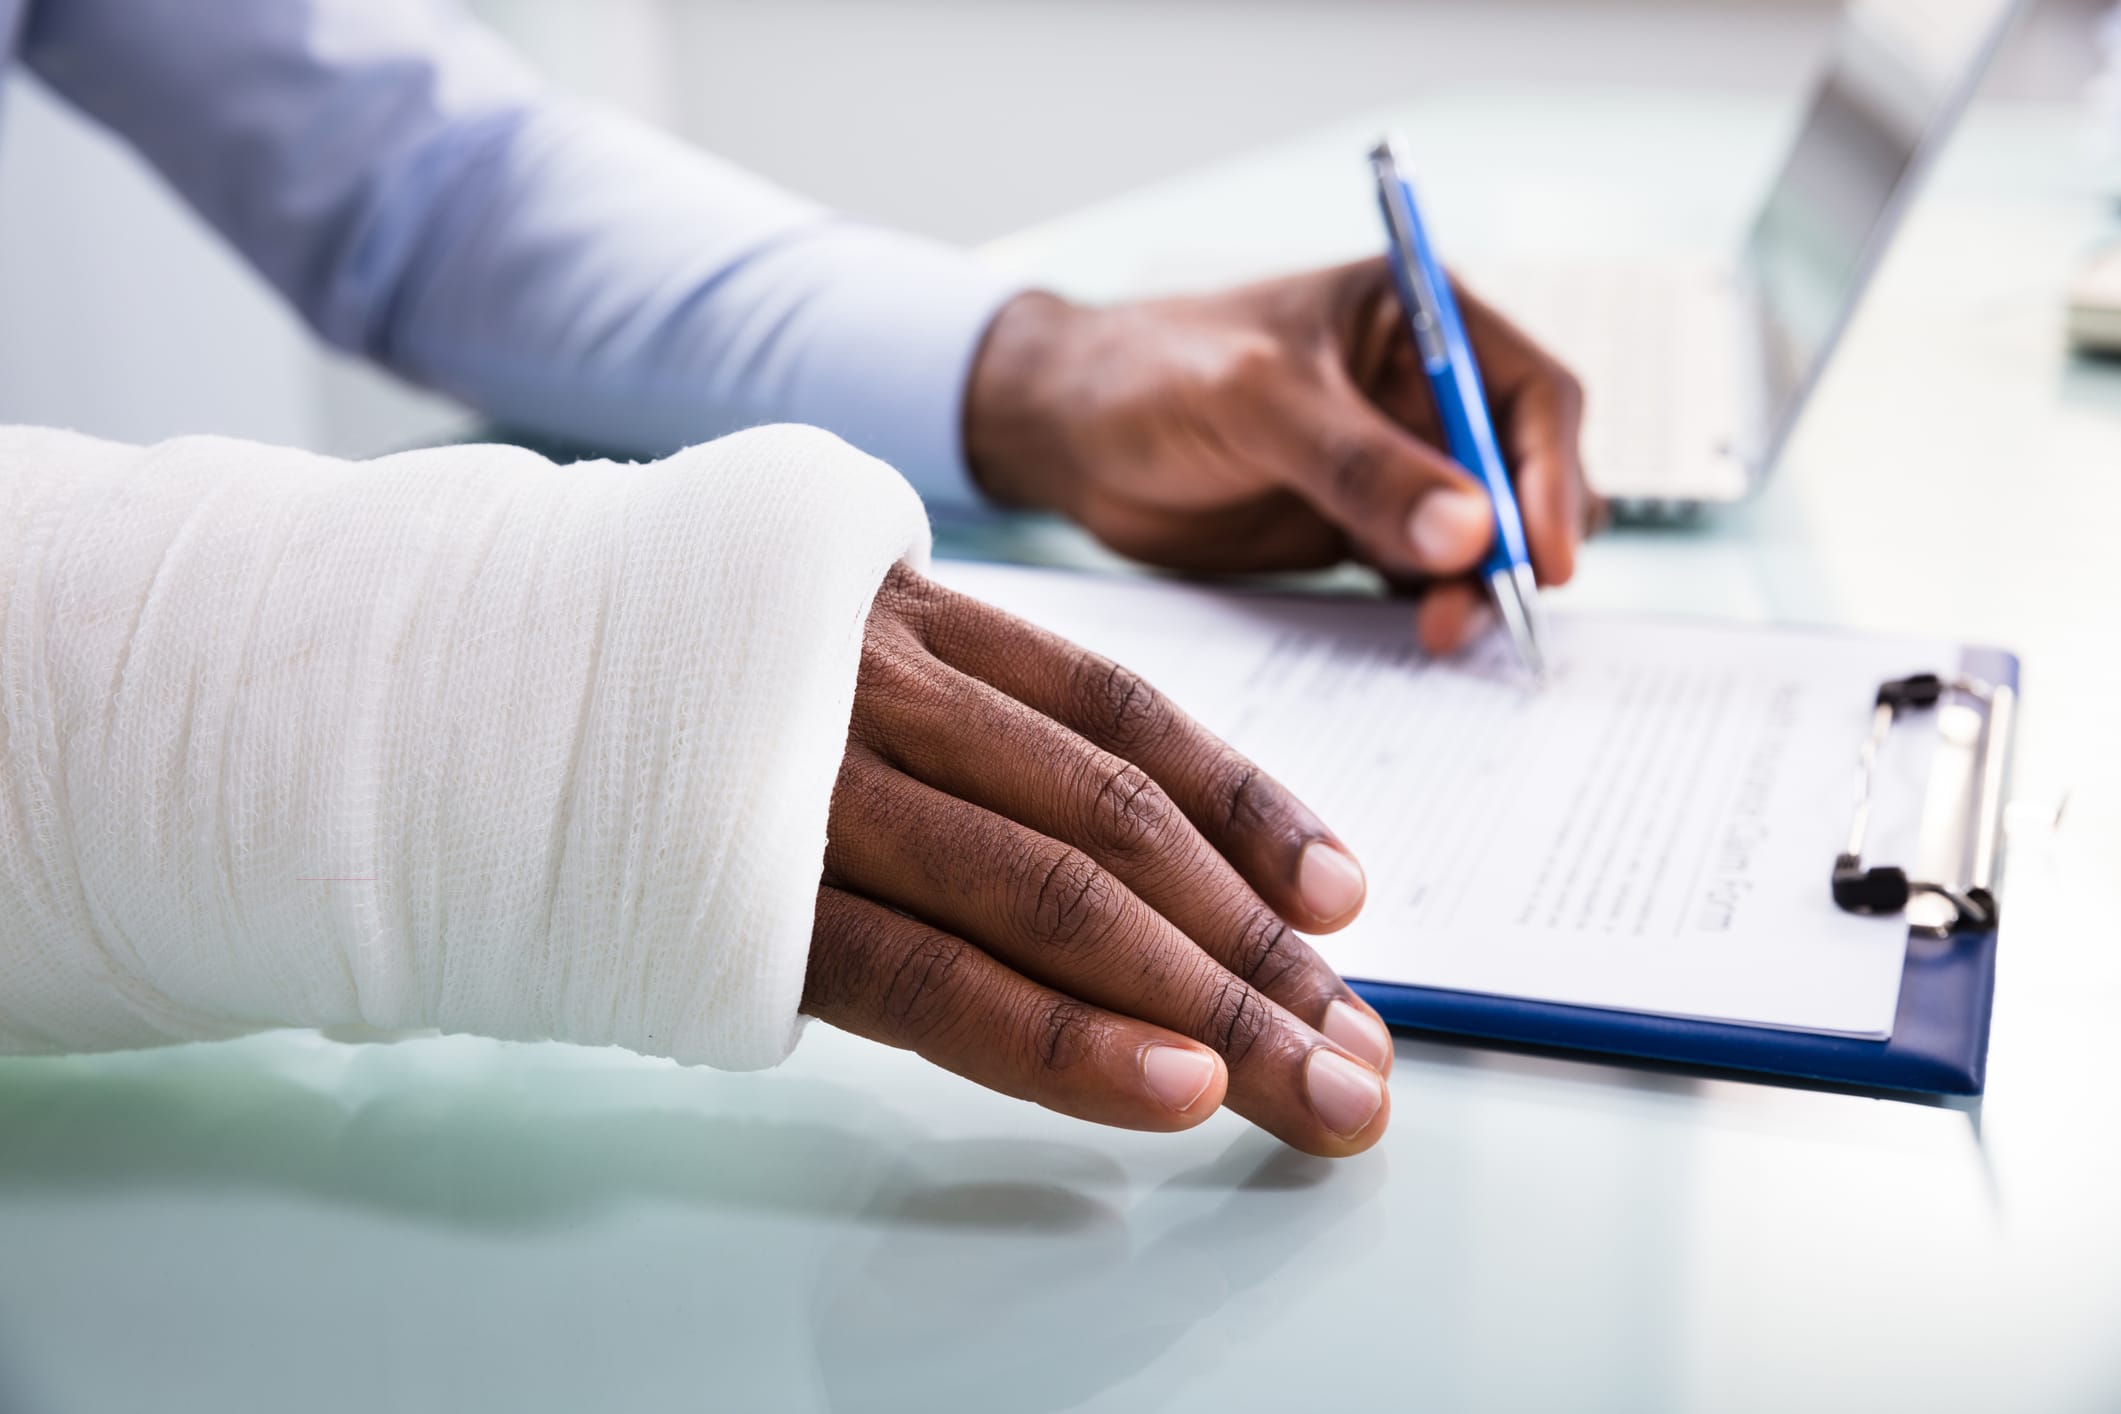 A person with a broken arm filling out a personal injury claim form